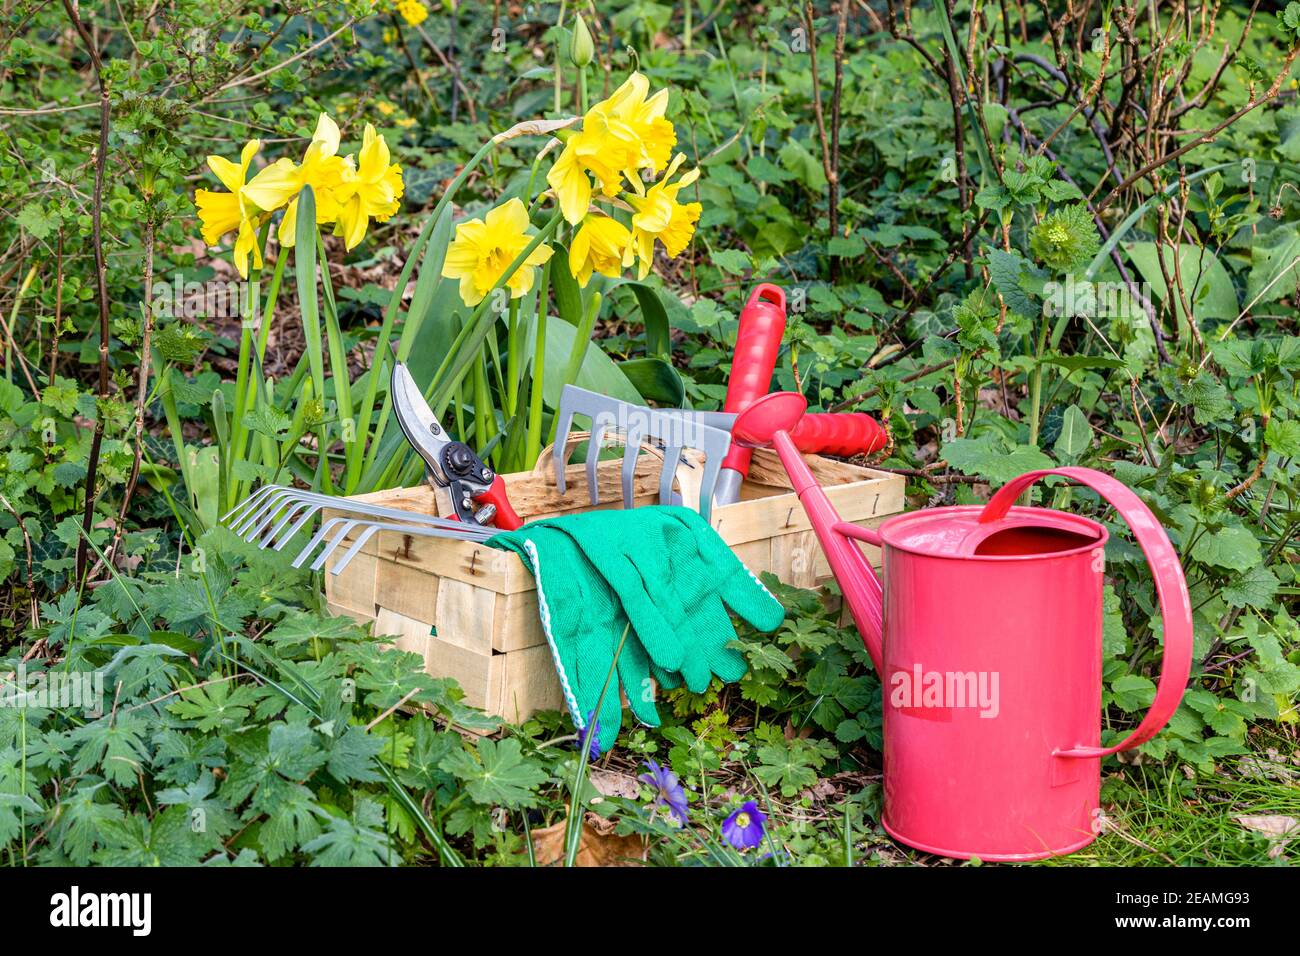 Gardening with rake, scissors, watering can and gloves in a garden in spring Stock Photo